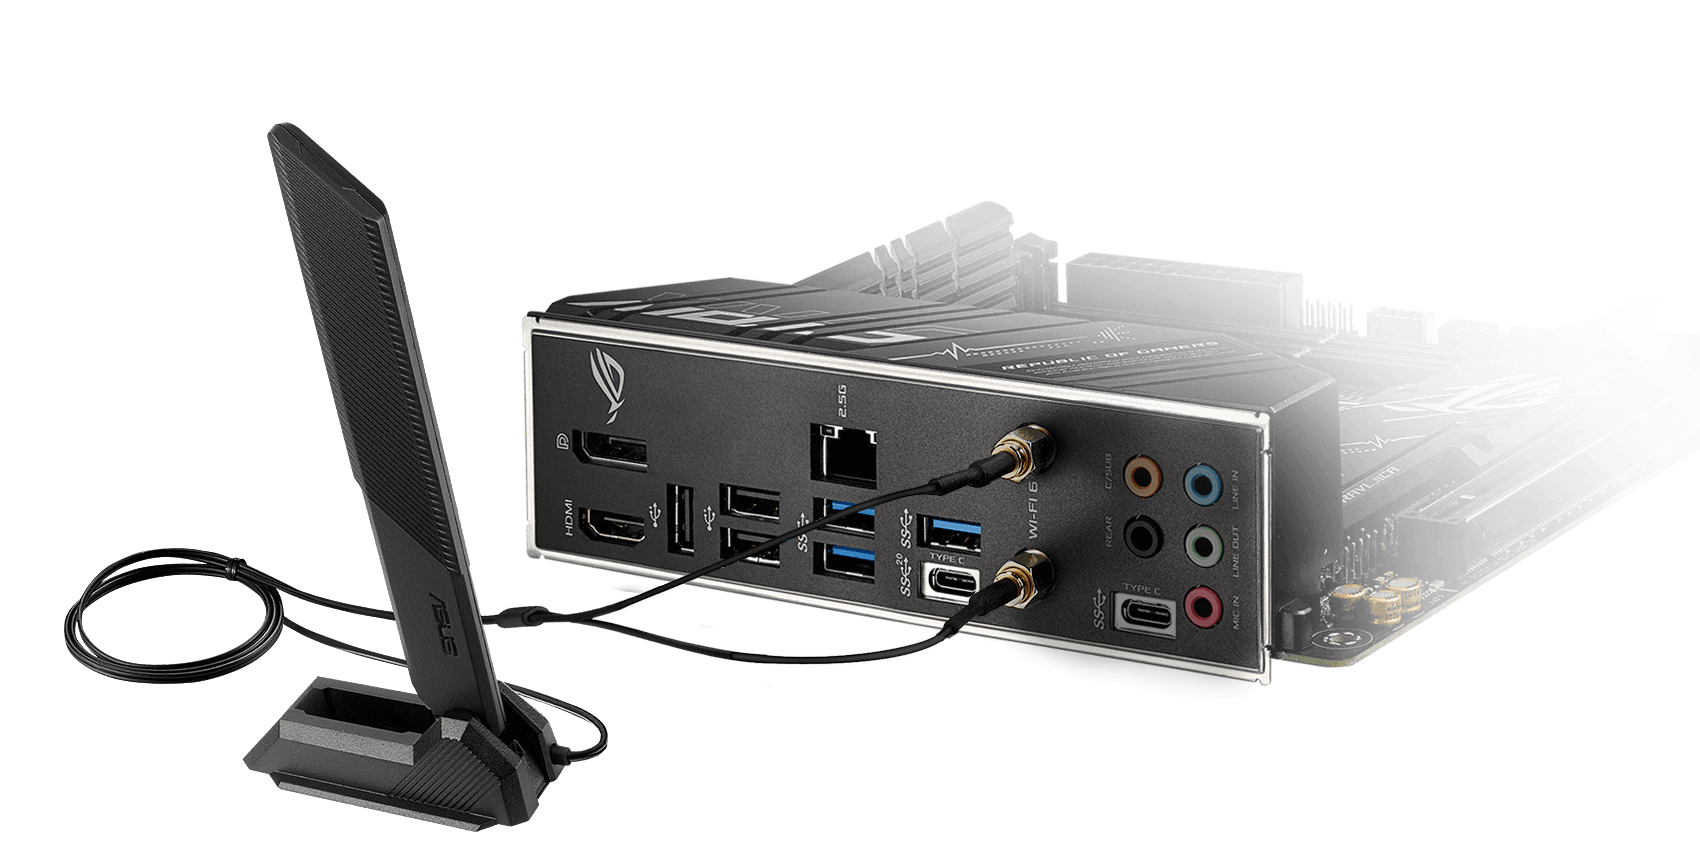 ROG Strix B660-I Gaming WiFi features WiFi 6, along with 2.5 Gb Ethernet. 